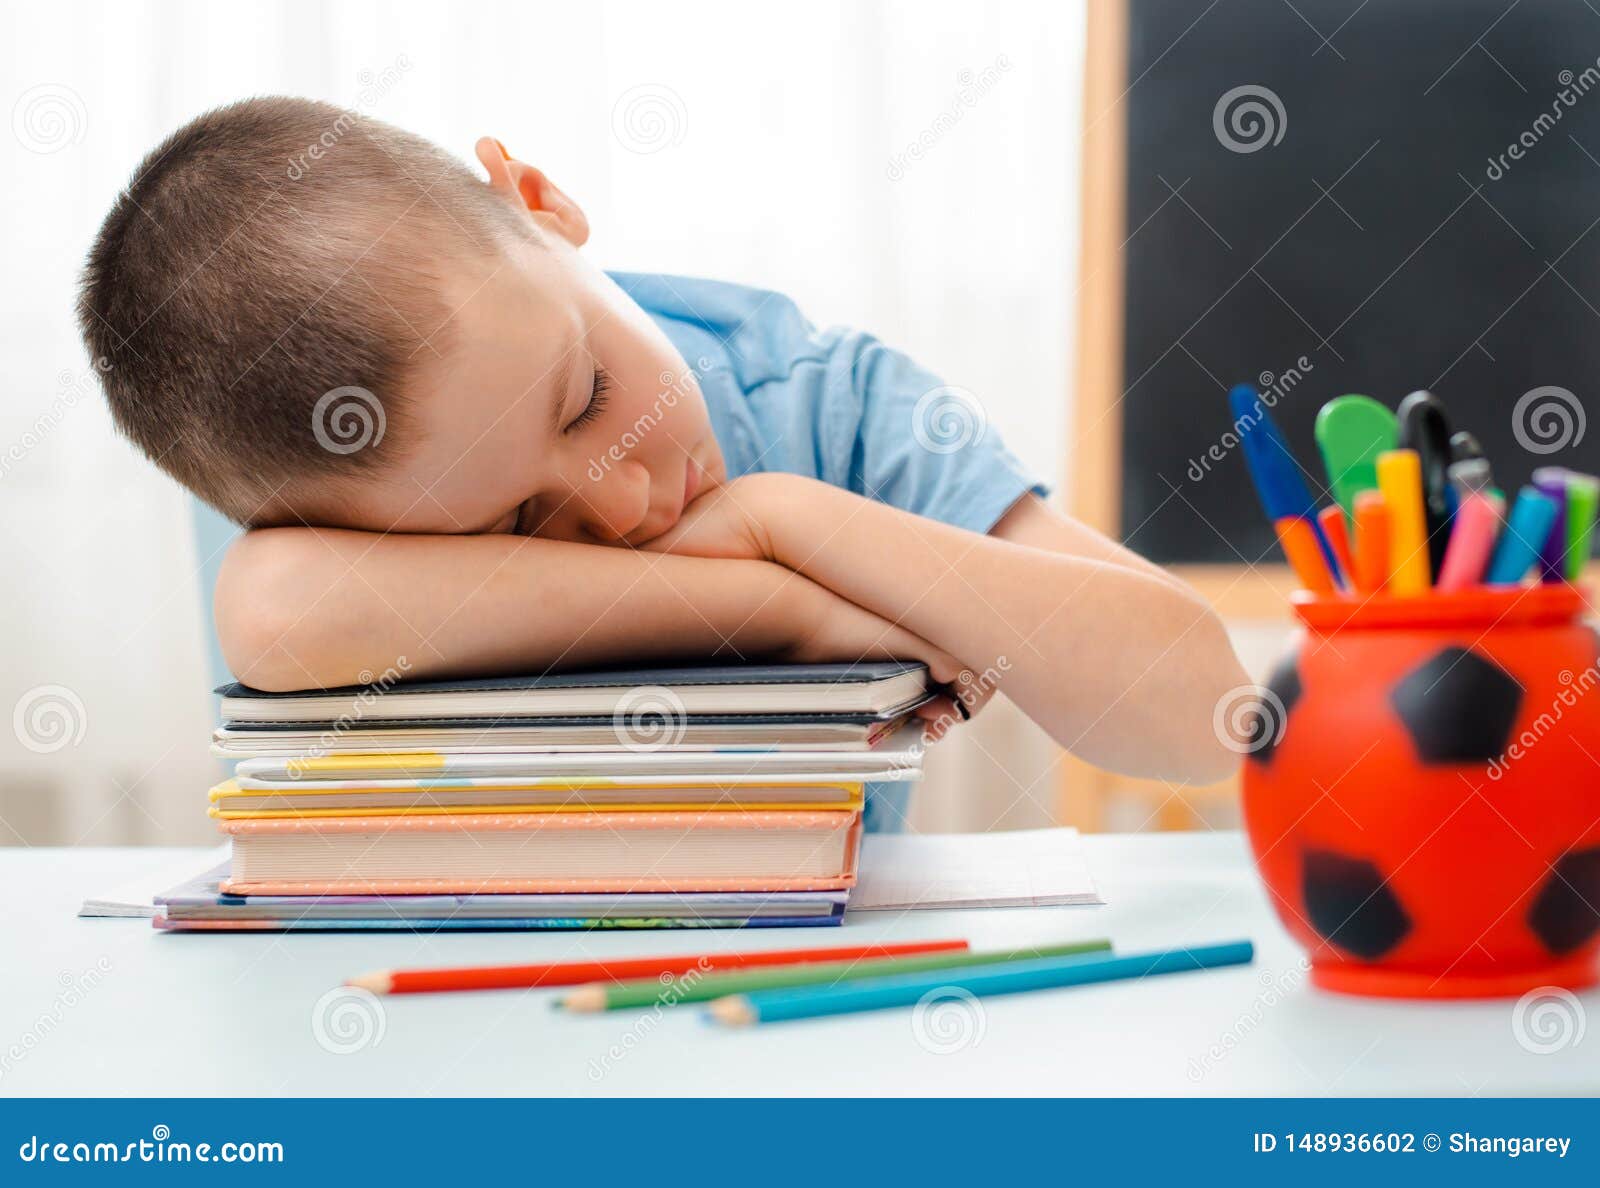 school boy sitting at home classroom lying desk filled with books training material schoolchild sleeping lazy bored